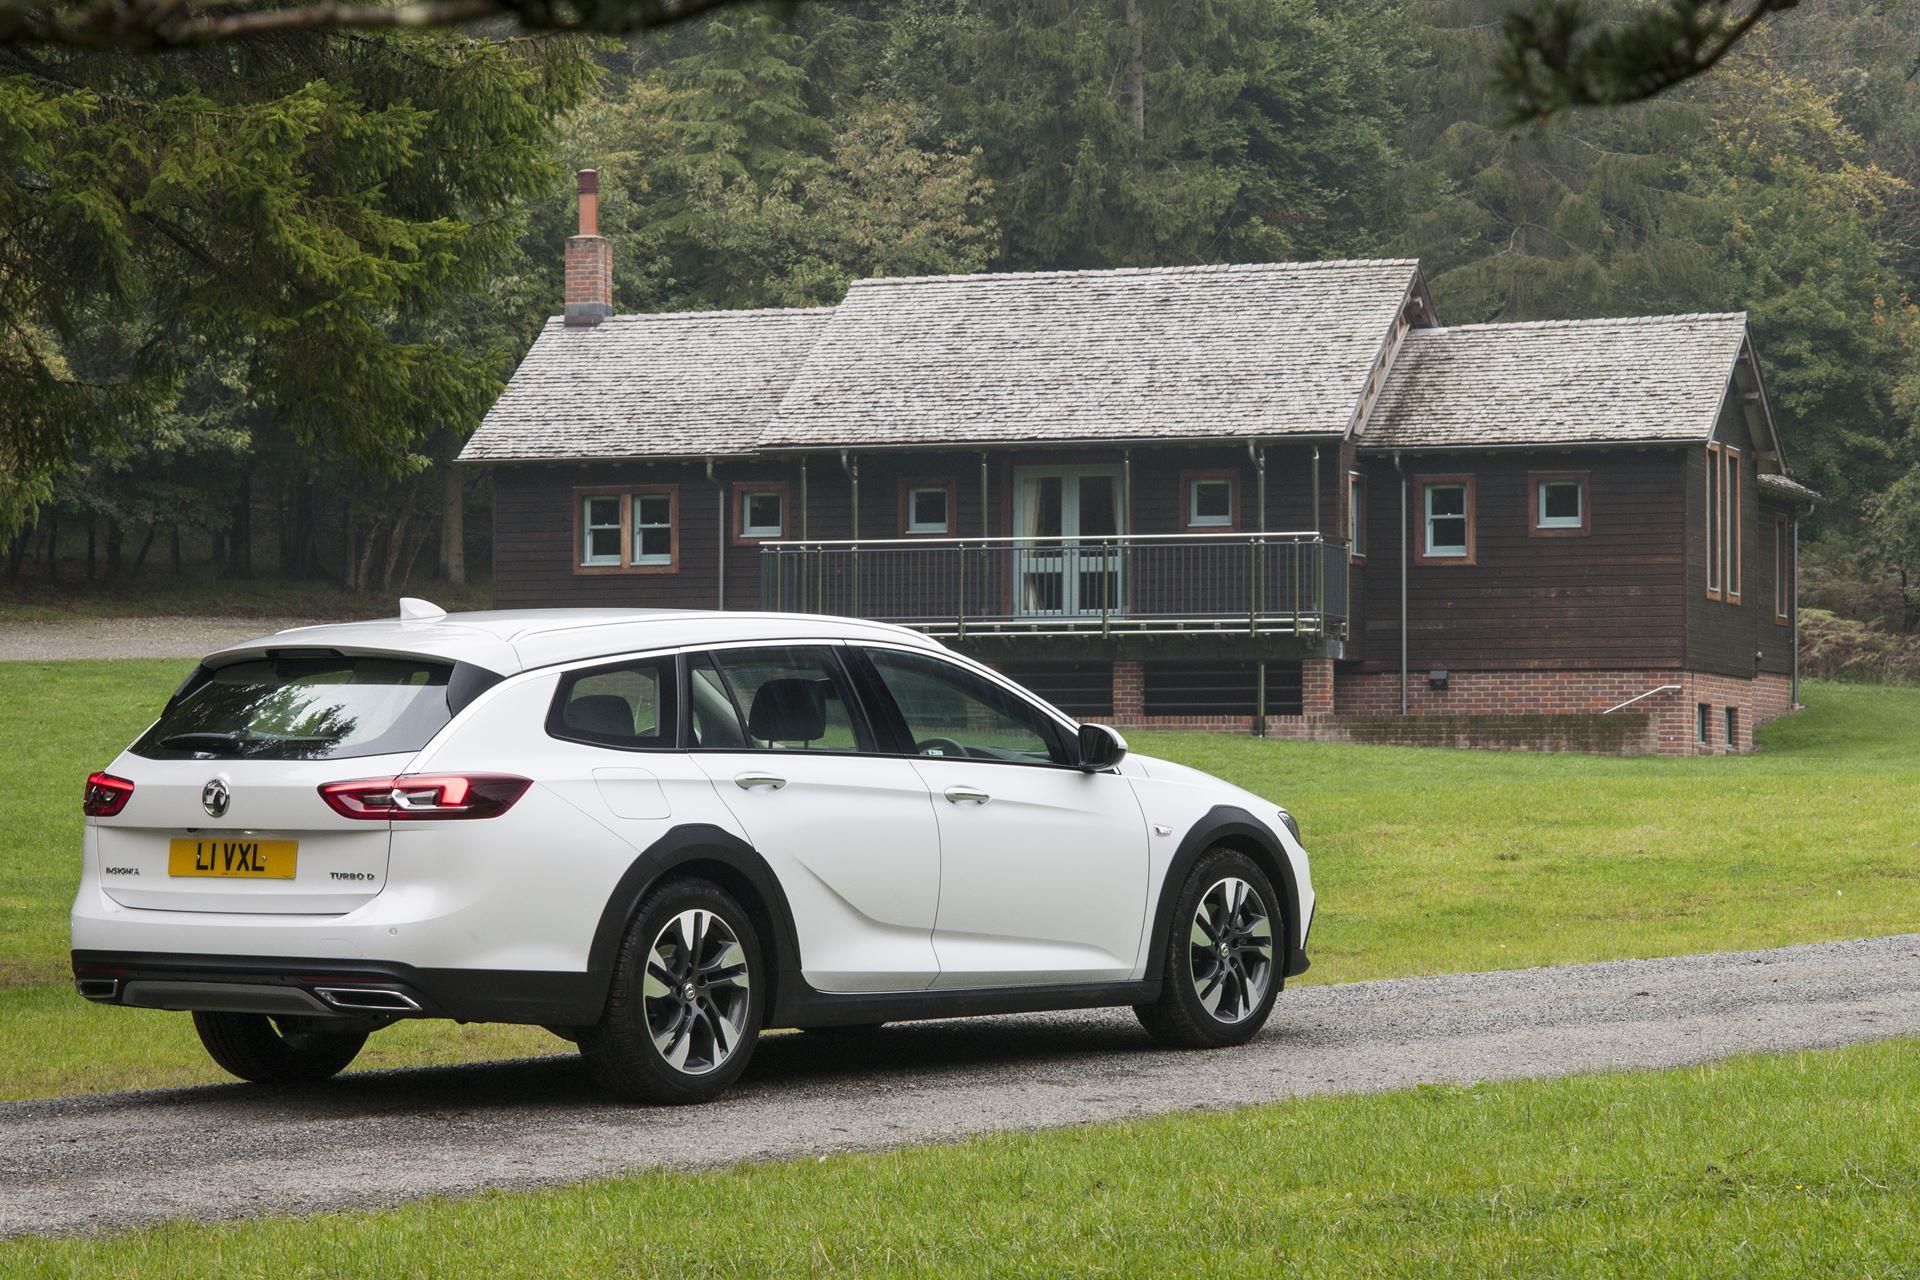 Country touring. Opel Insignia Country Tourer 2019. Opel Insignia Country Tourer 2018. Vauxhall Insignia Country Tourer. Opel Insignia Country Tourer 4x4 2018.